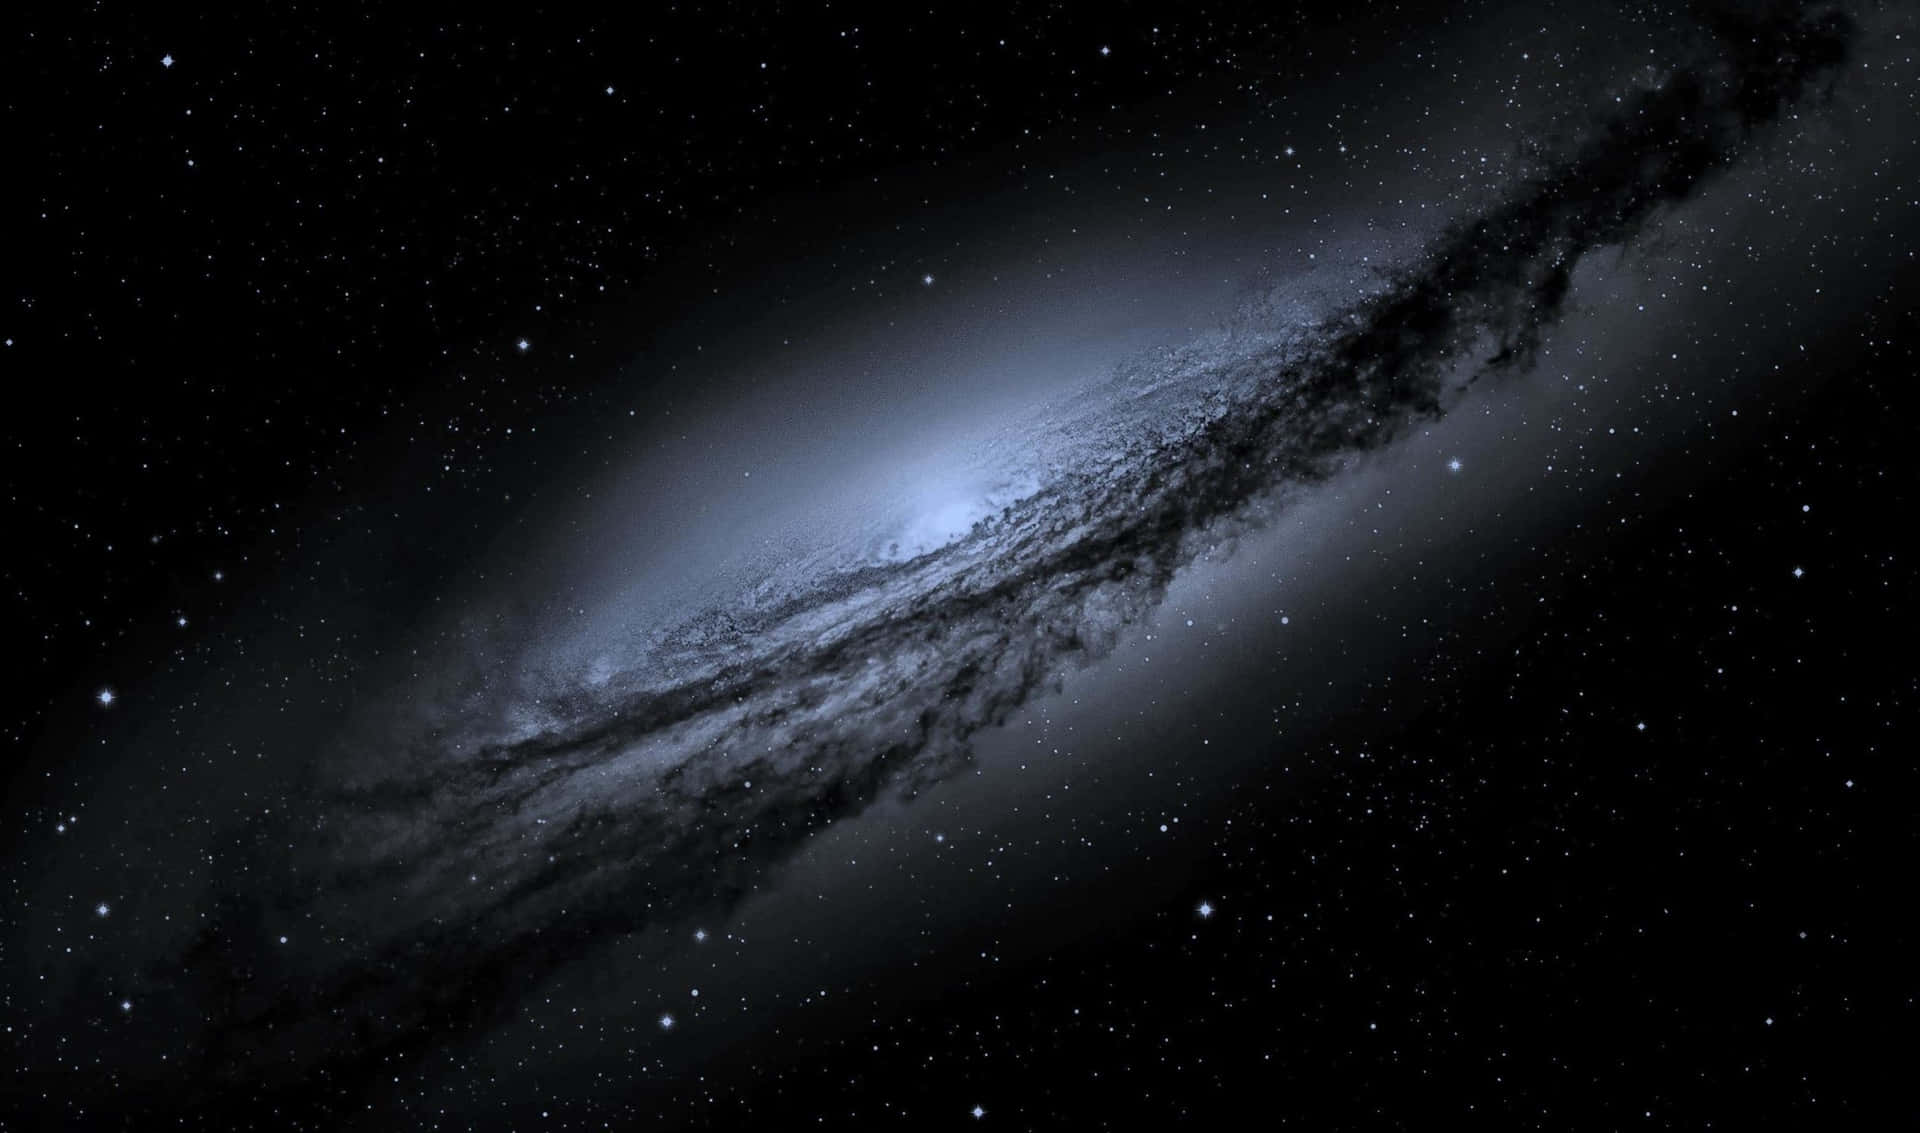 The Galaxy Is Shown In The Background